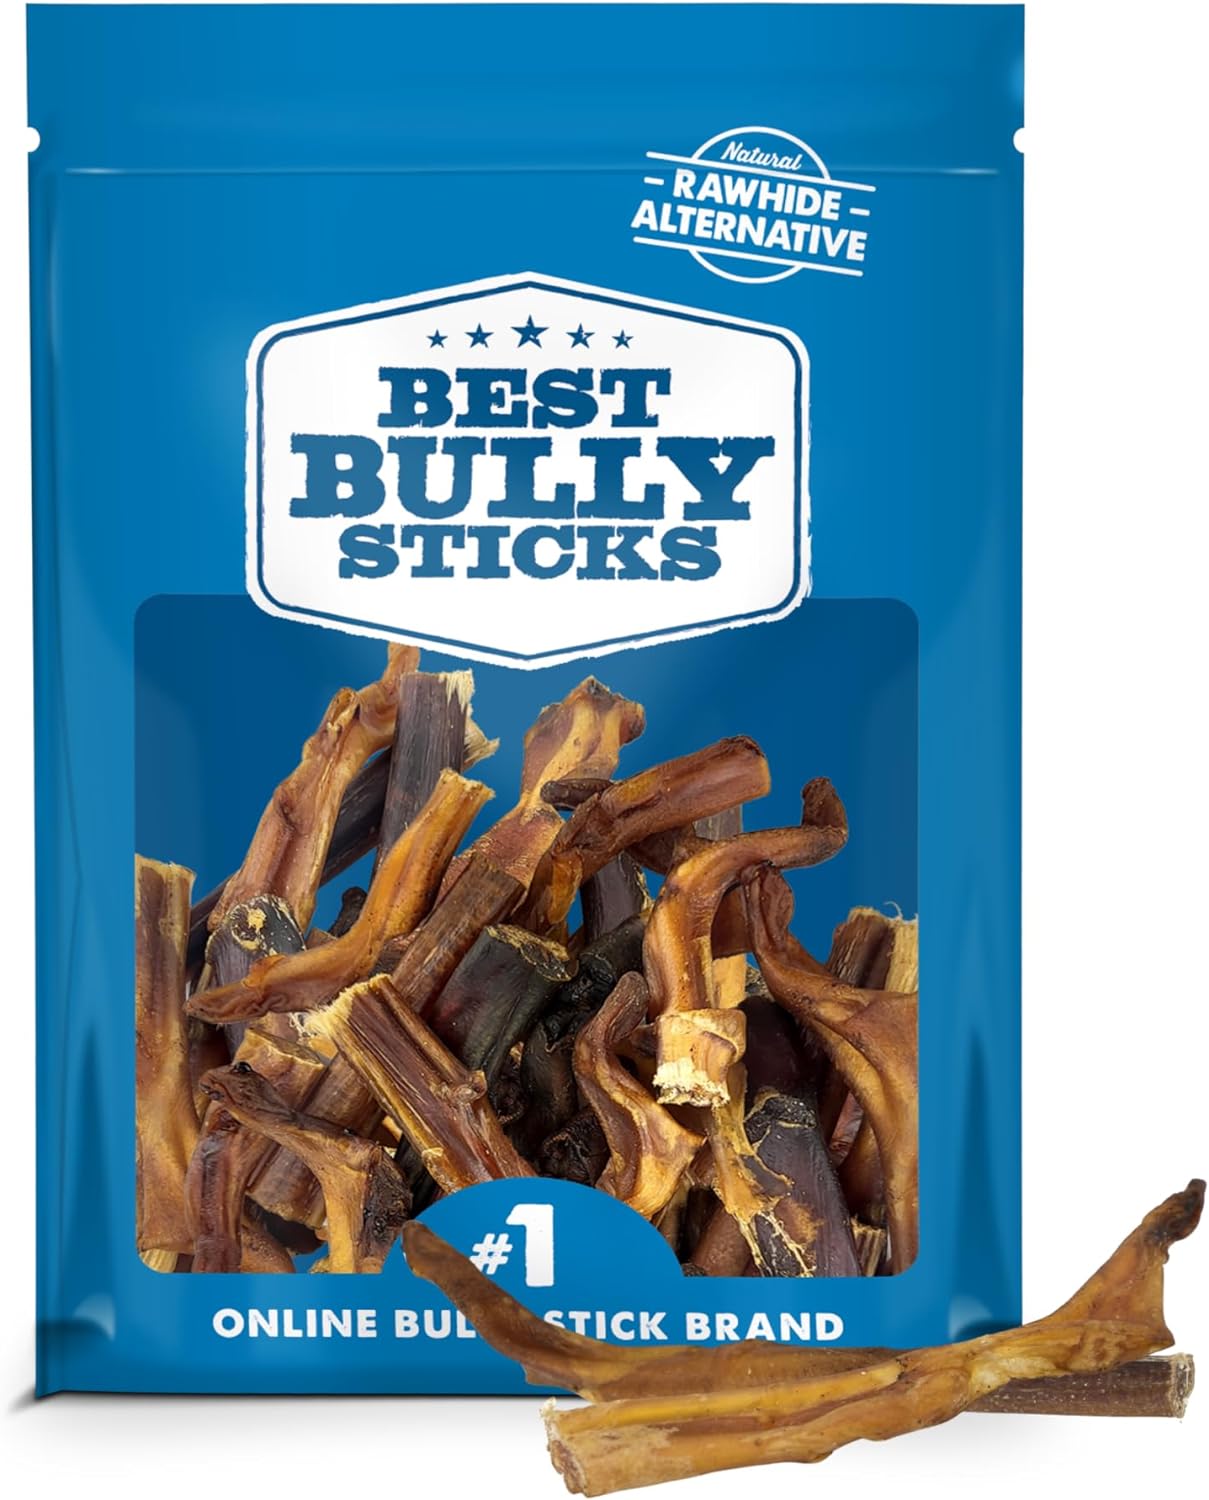 Best Bully Sticks 2-4 Inch Junior Bully Sticks for Dogs - 100% Natural, Grass-Fed Beef, Dog Bully Sticks for Small Dogs, Puppy, Mini Breeds - Grain and Rawhide Free Bully Stick Dog Chews | 8 oz